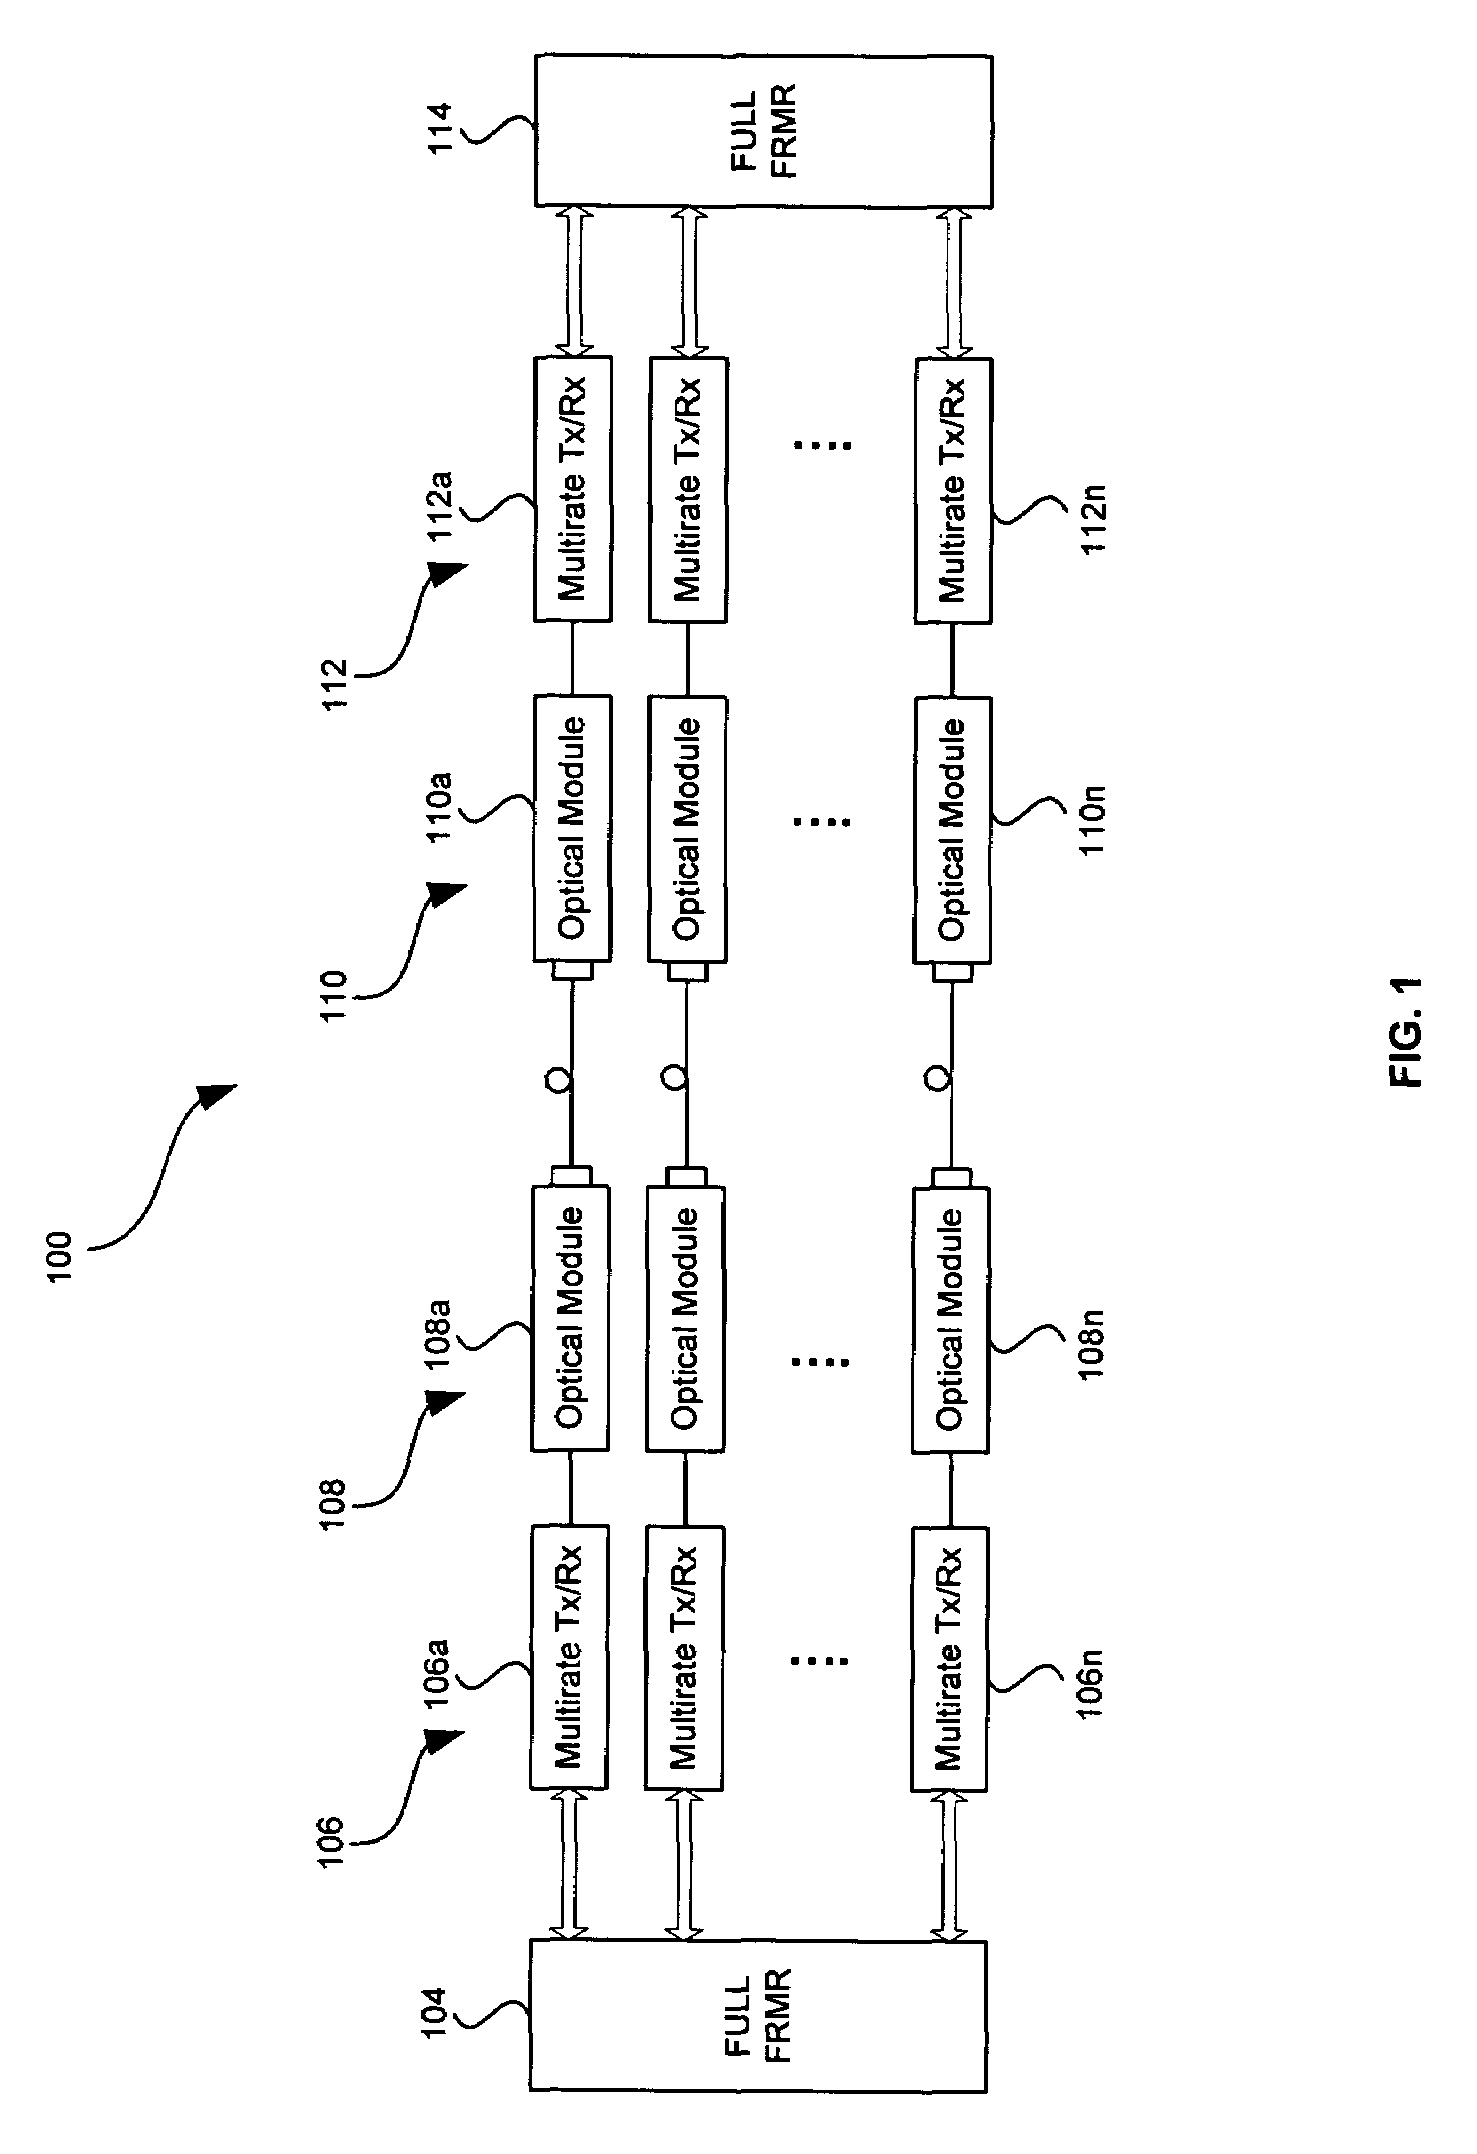 Method and system for pattern-independent phase adjustment in a clock and data recovery (CDR) circuit